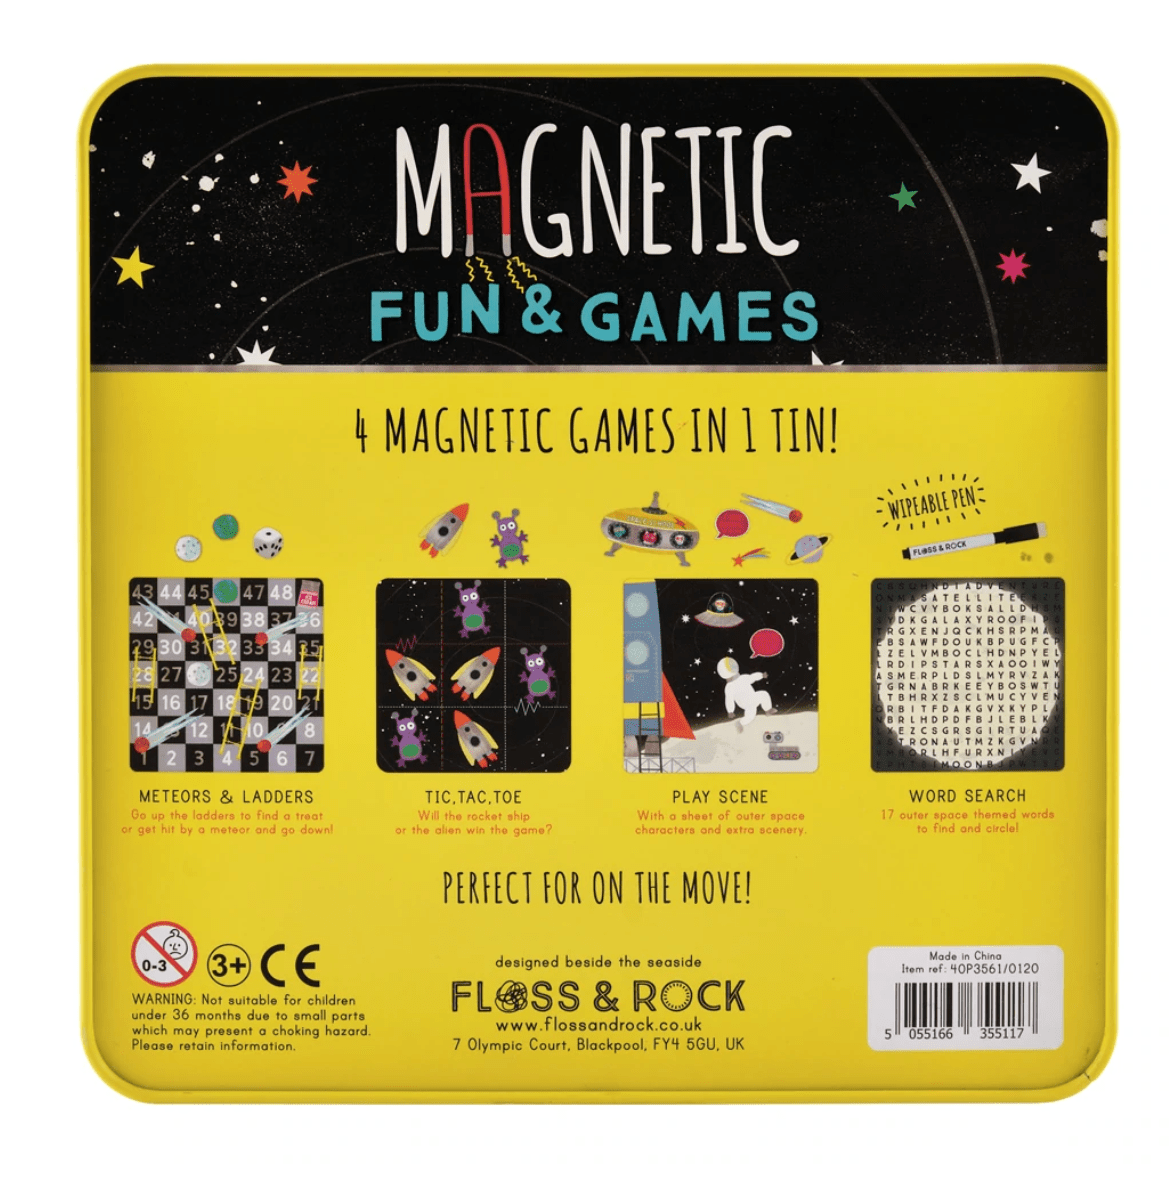 Magnetic Fun & Games - Space - Twinkle Twinkle Little One